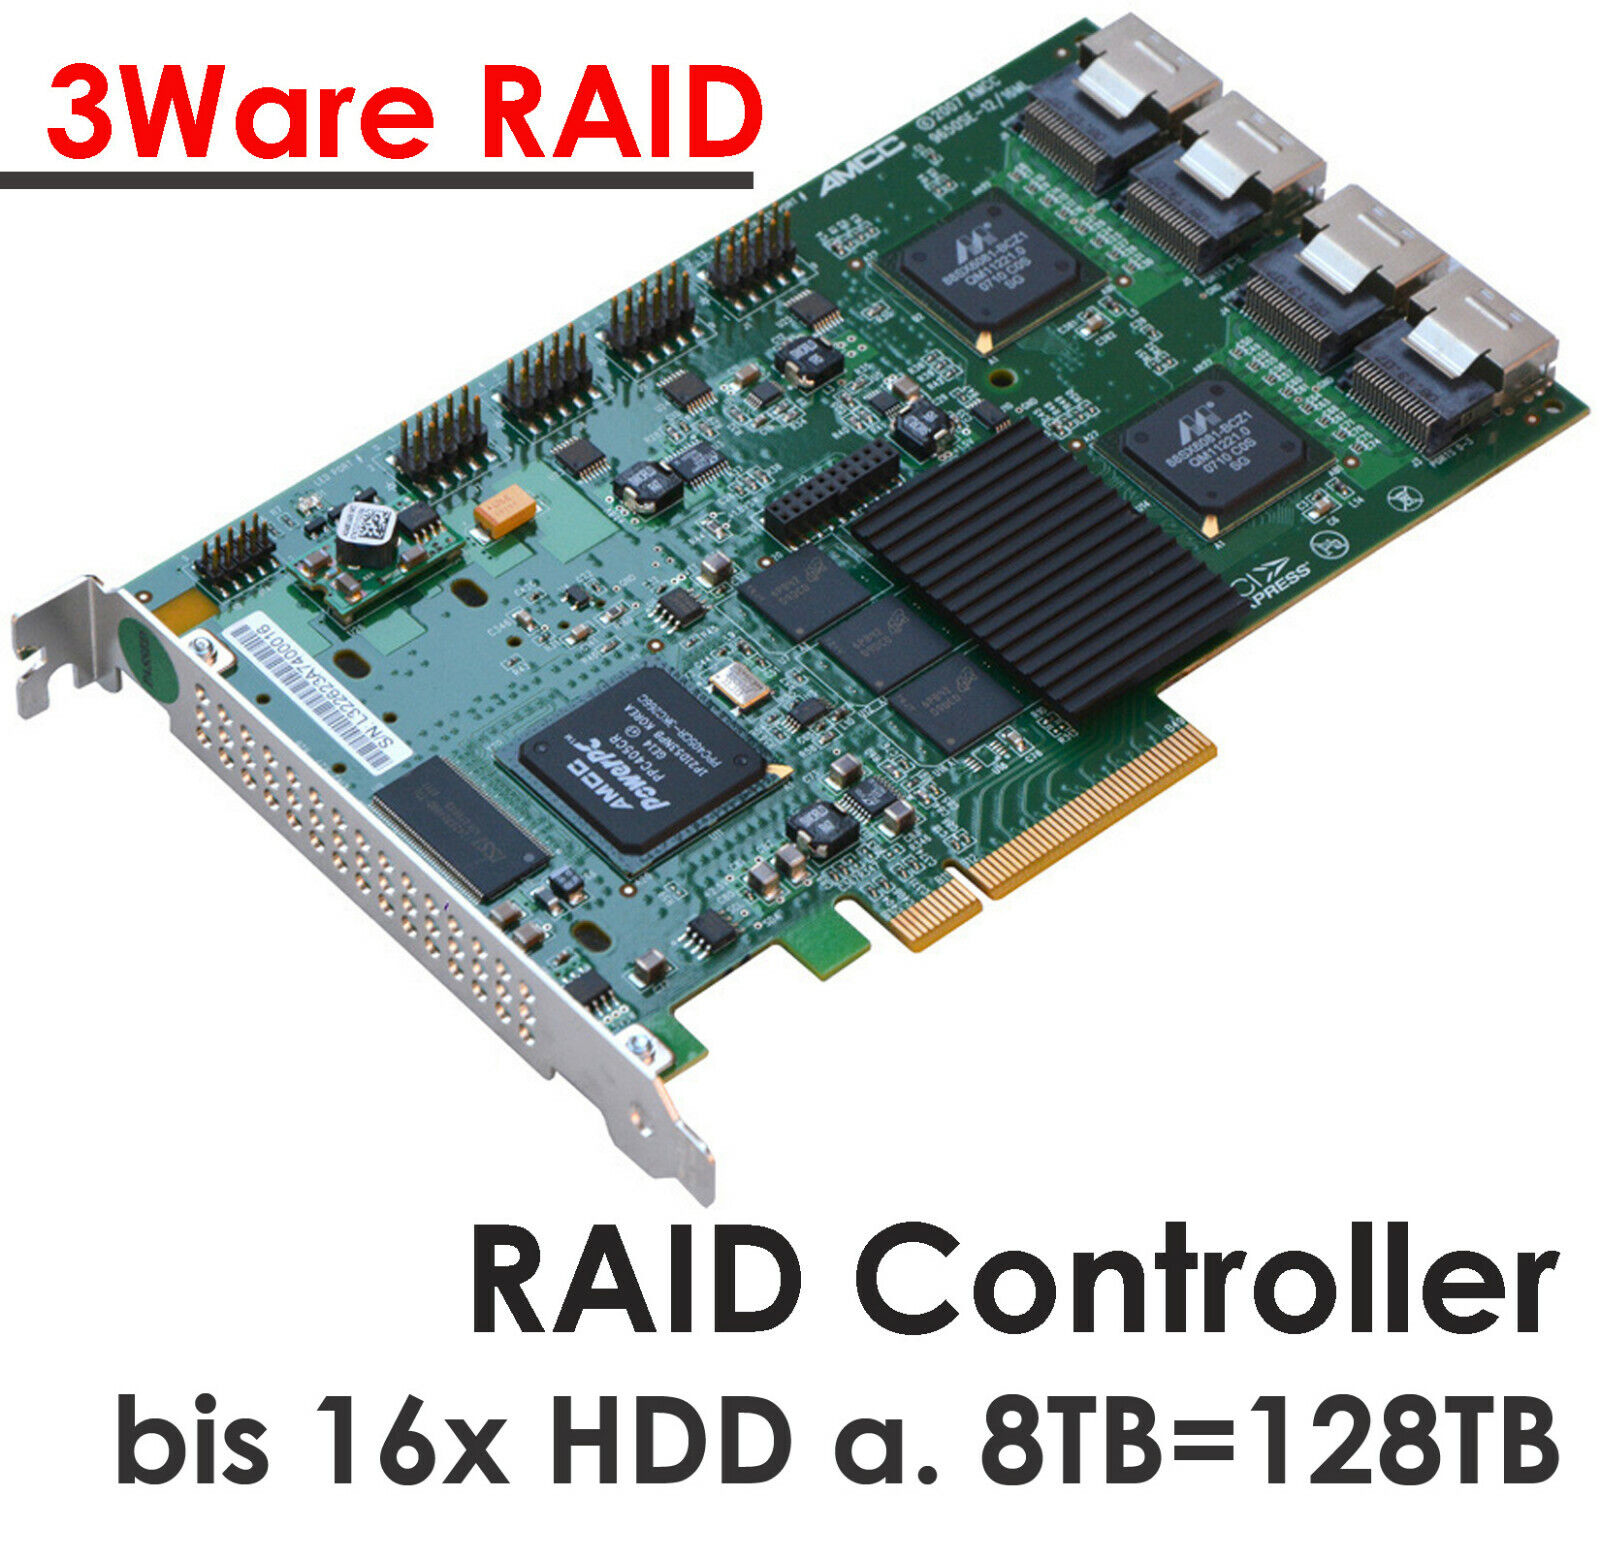 Pcie 8x S-ATA Raid Controller Lsi 3ware 9650SE-0.5oz Cable For 16 Hdds A.8TB